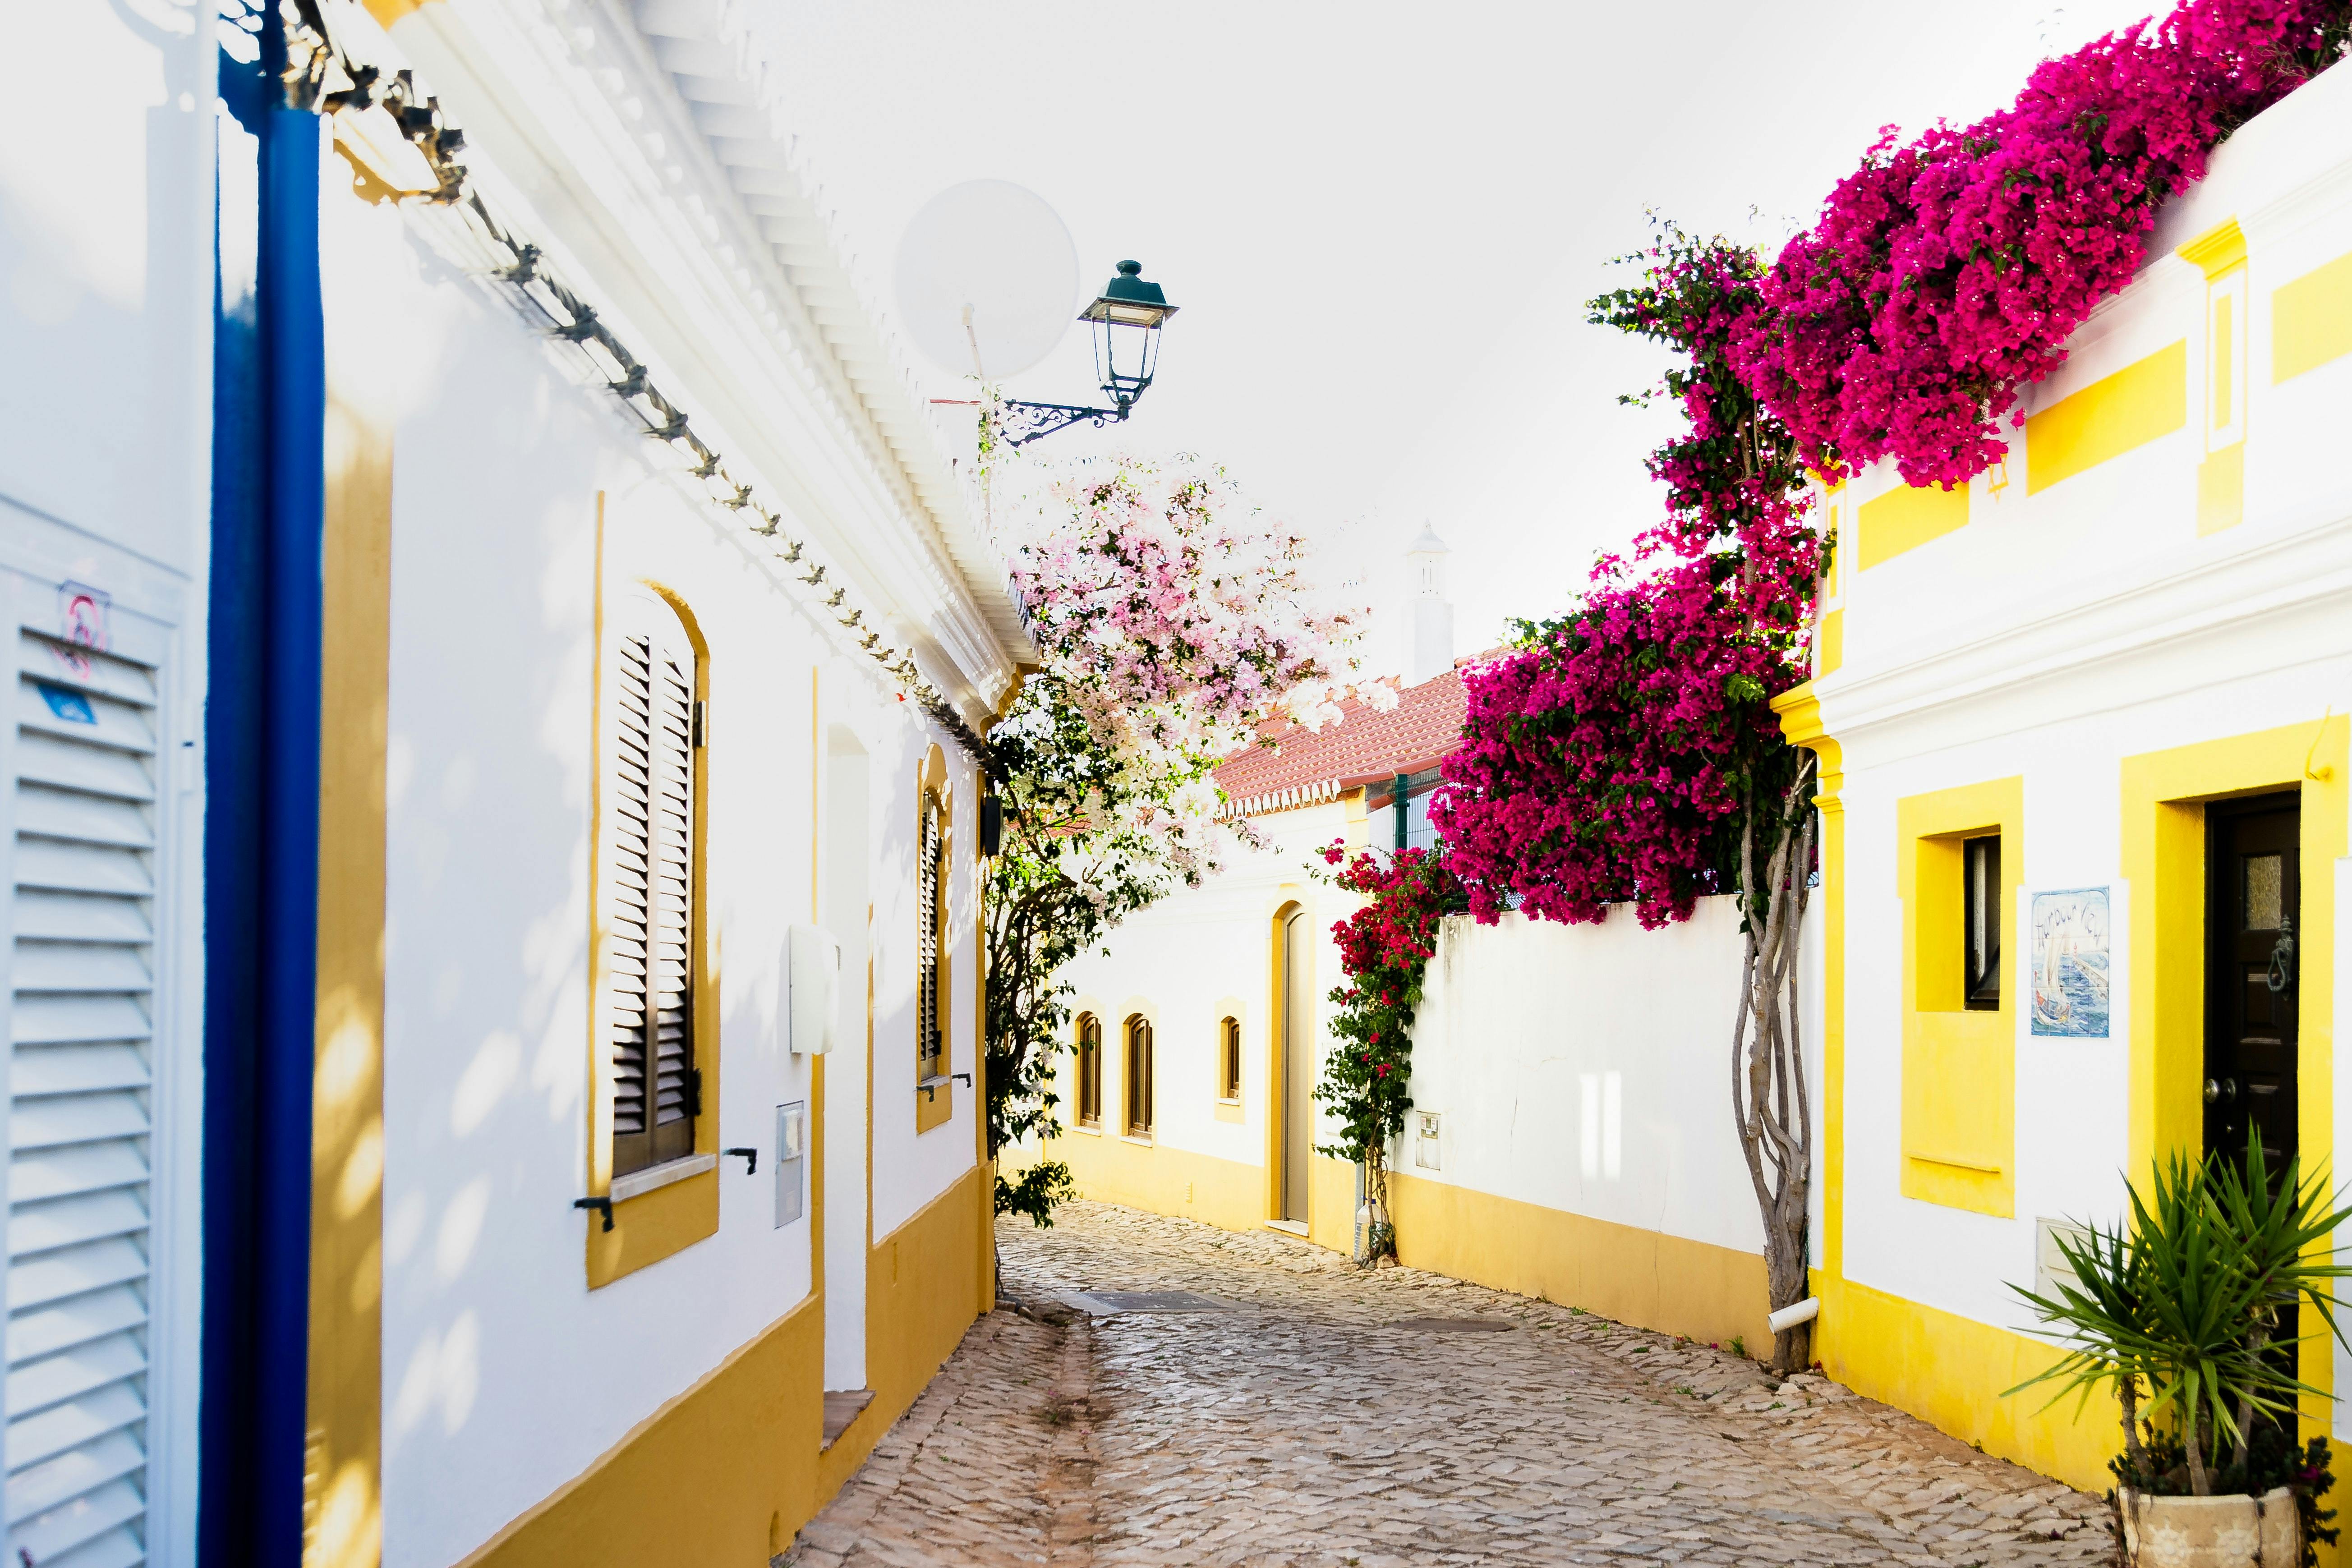 Narrow street with white and yellow houses and pink flowers